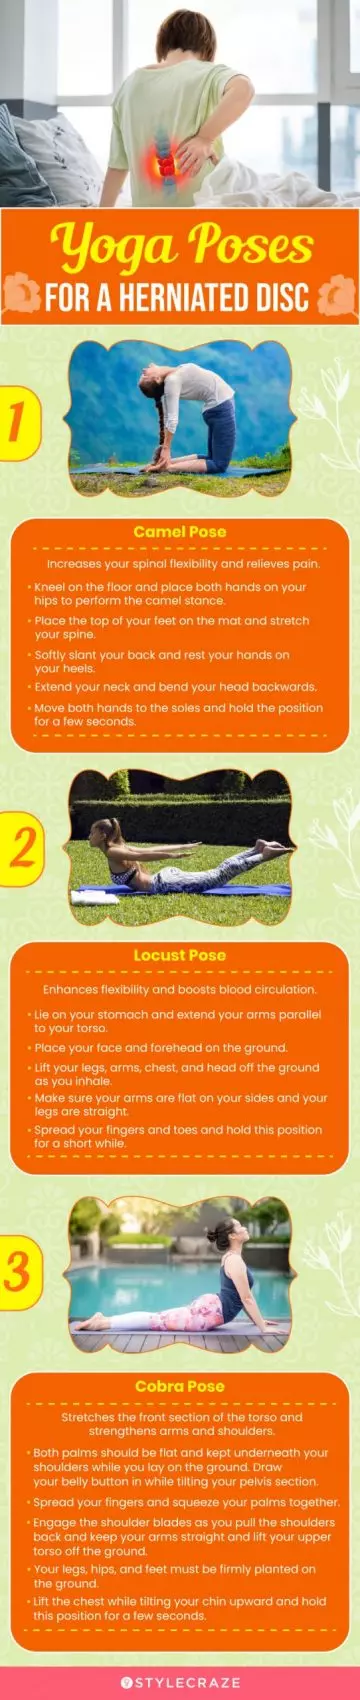 yoga poses for herinated disc (infographic)